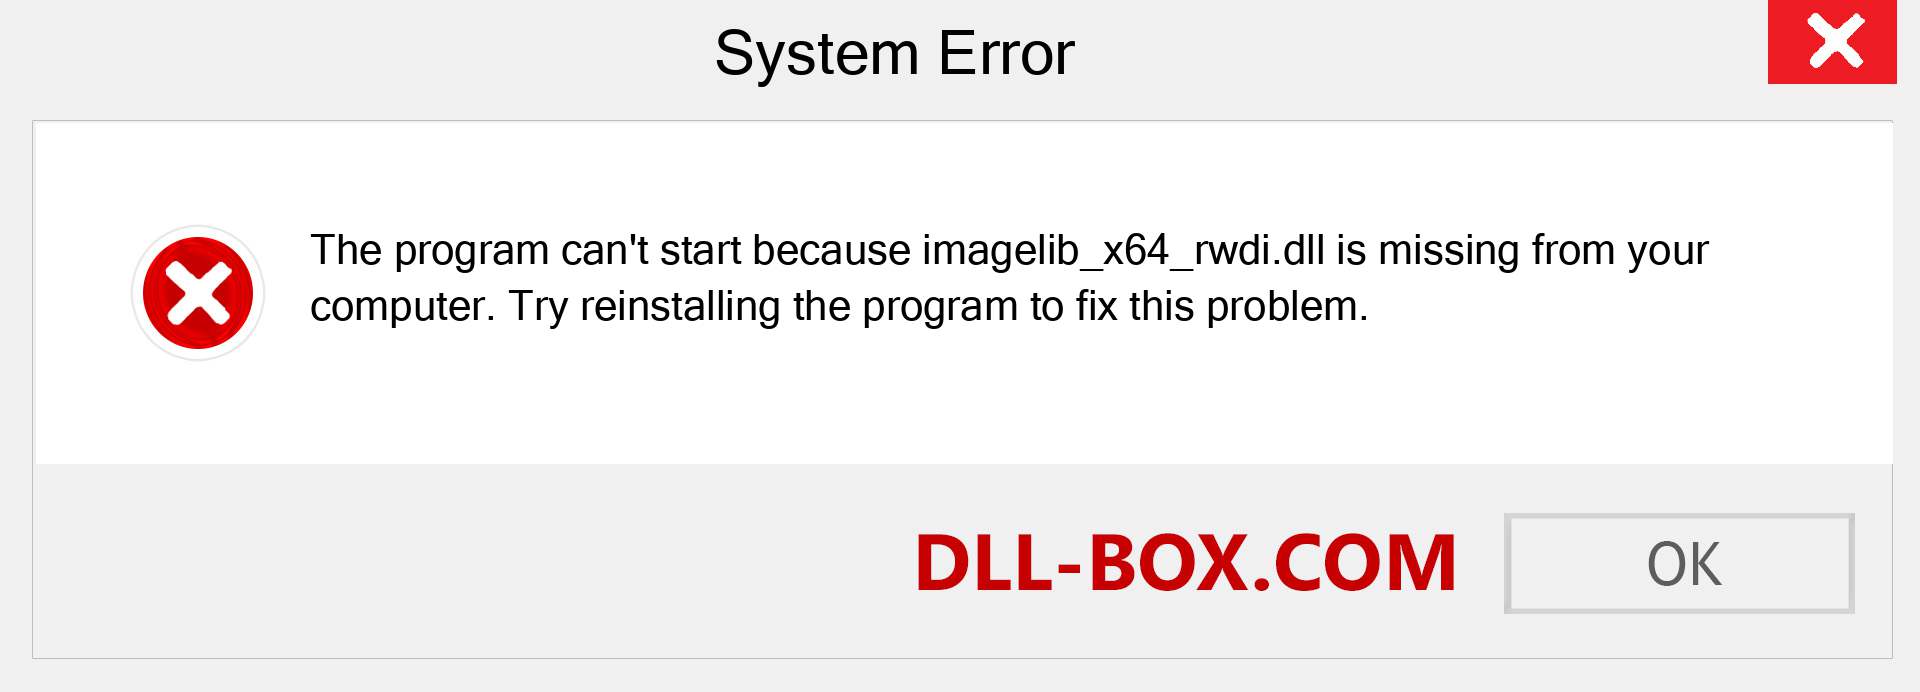  imagelib_x64_rwdi.dll file is missing?. Download for Windows 7, 8, 10 - Fix  imagelib_x64_rwdi dll Missing Error on Windows, photos, images